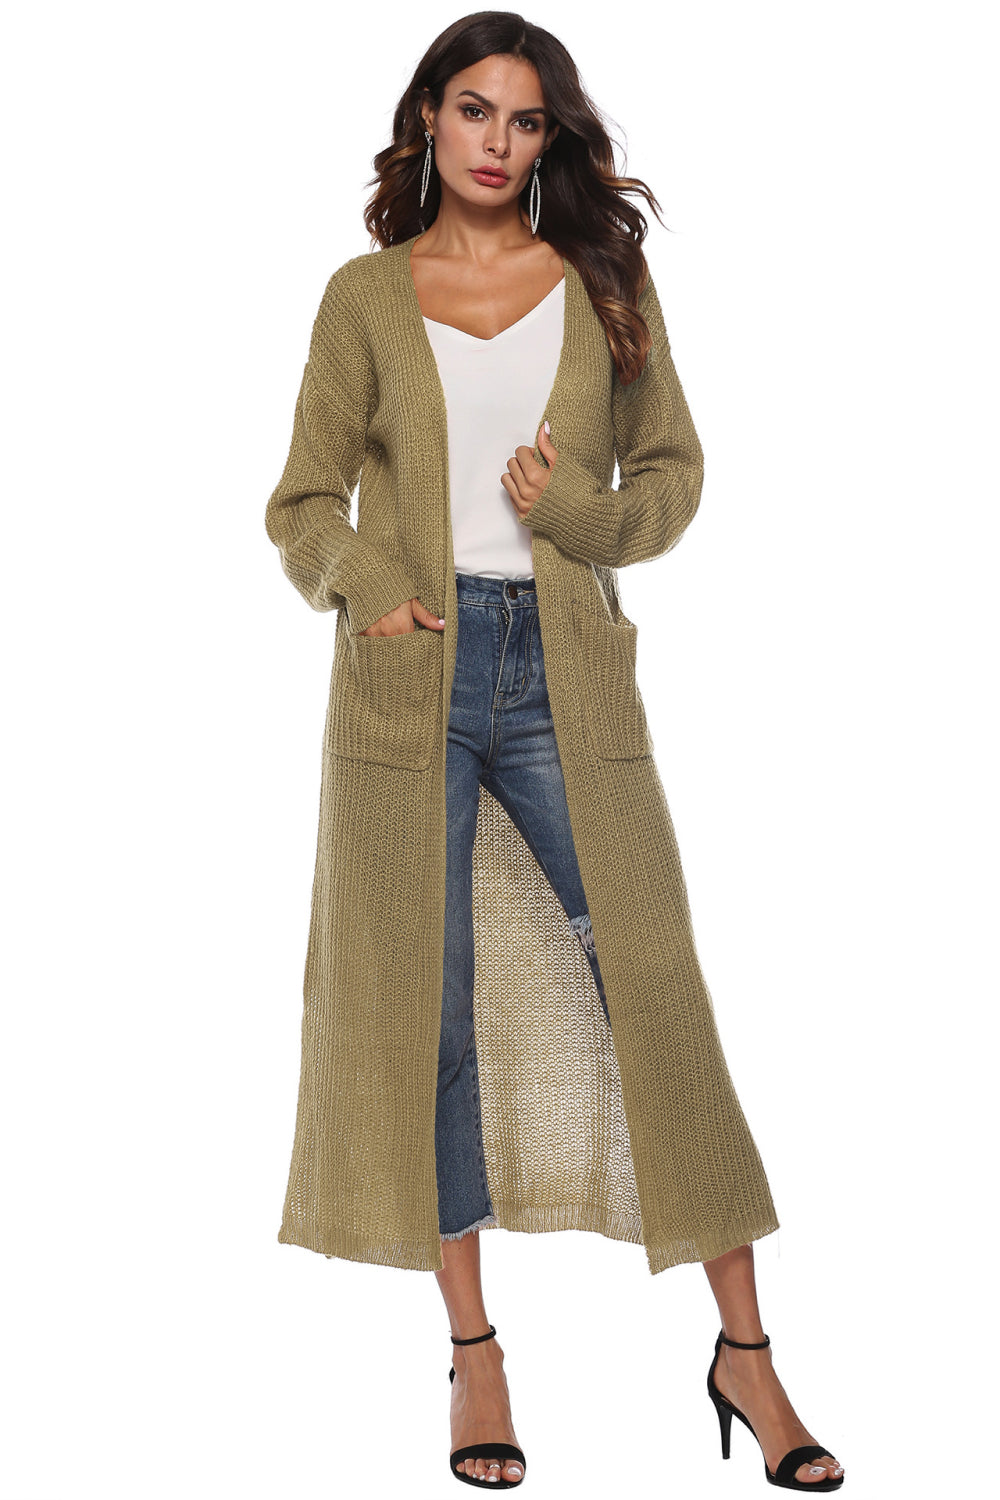 Long Sleeve Open Front Buttoned Cardigan - Brown / S - Women’s Clothing & Accessories - Shirts & Tops - 22 - 2024